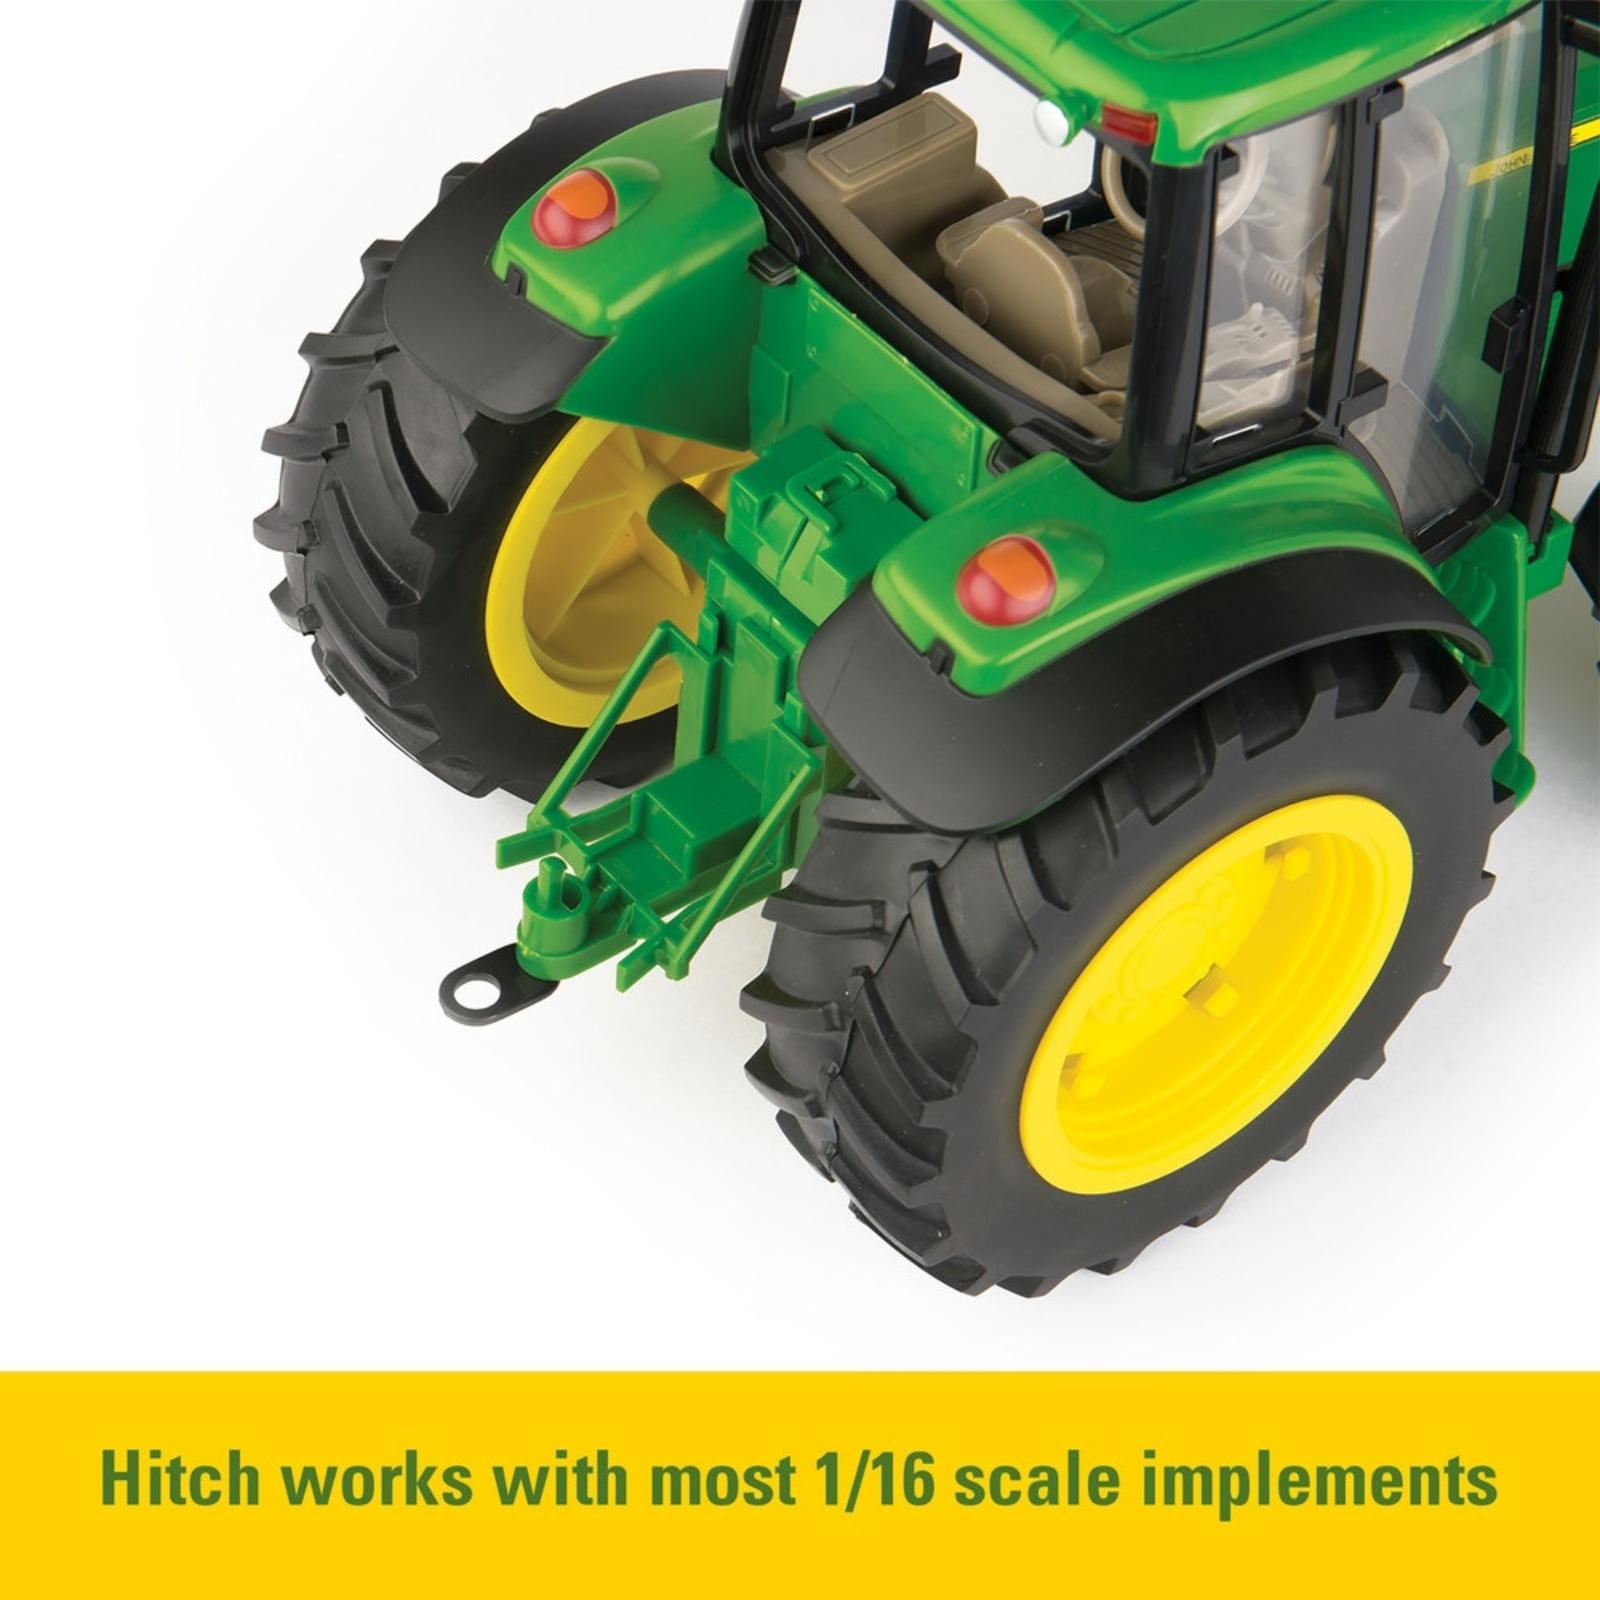 hitch works with most 1/16 scale impliments